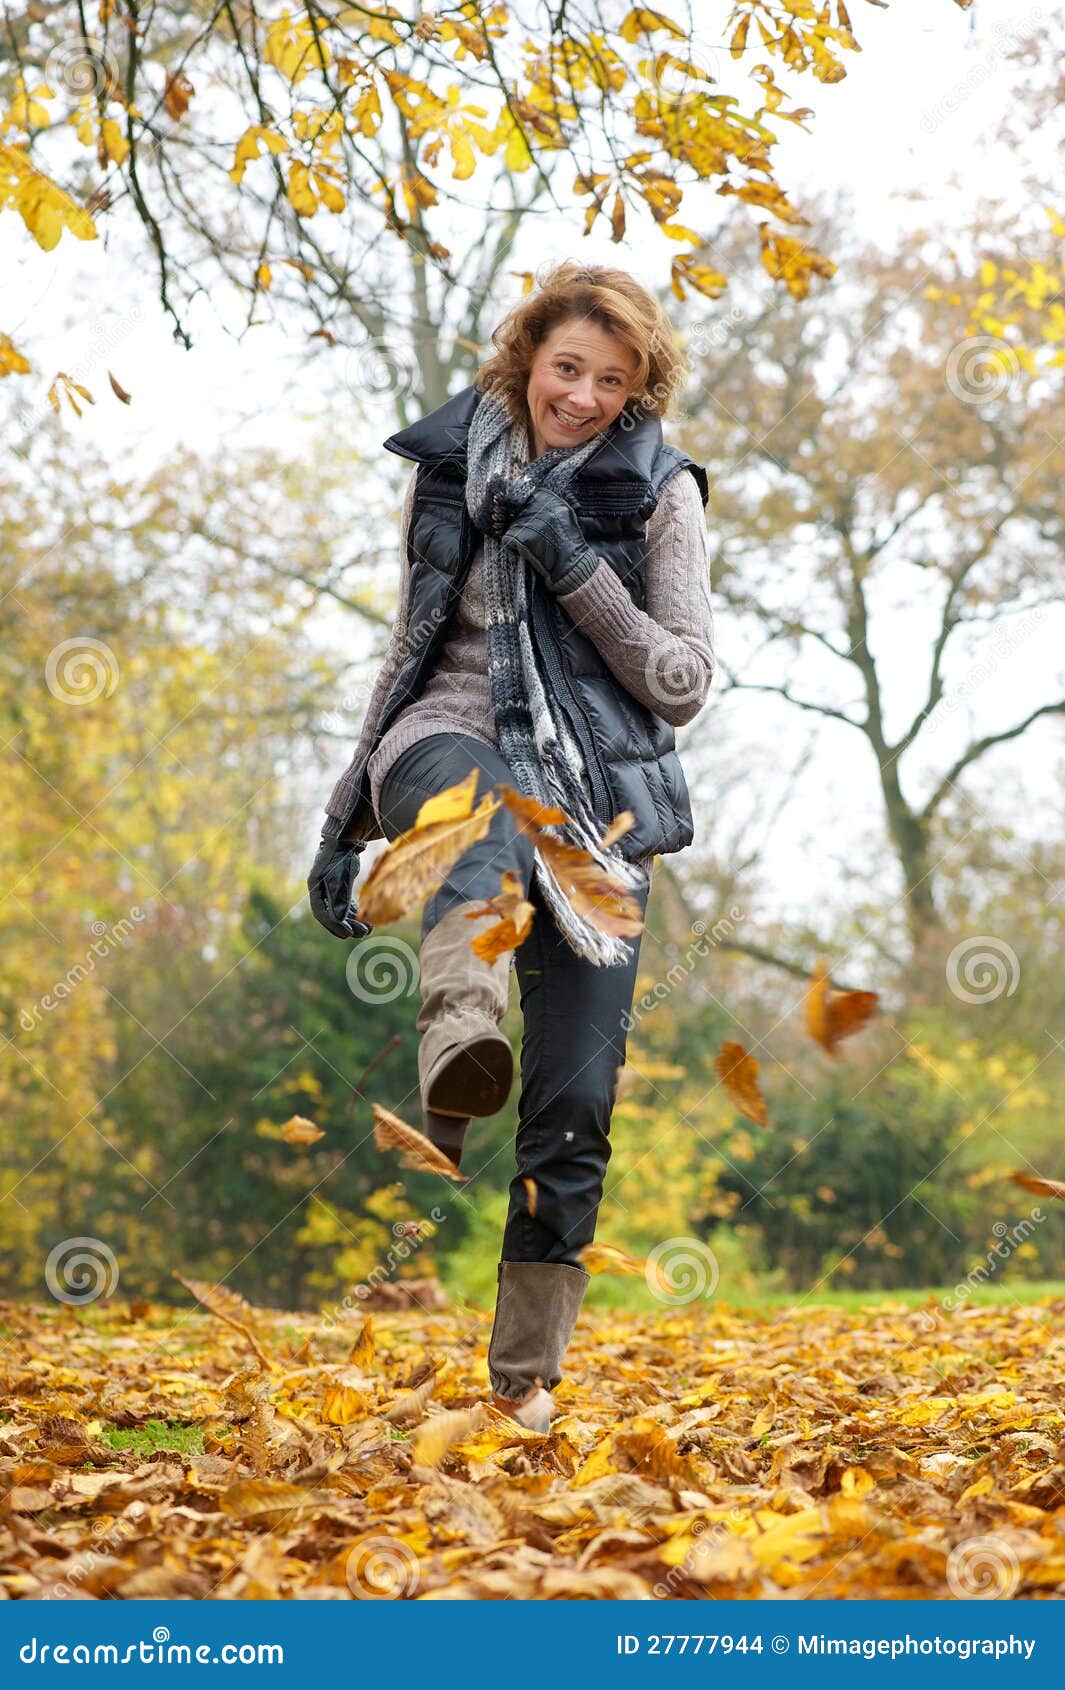 Woman Kicking Yellow Leaves In Autumn Stock Images - Image: 27777944